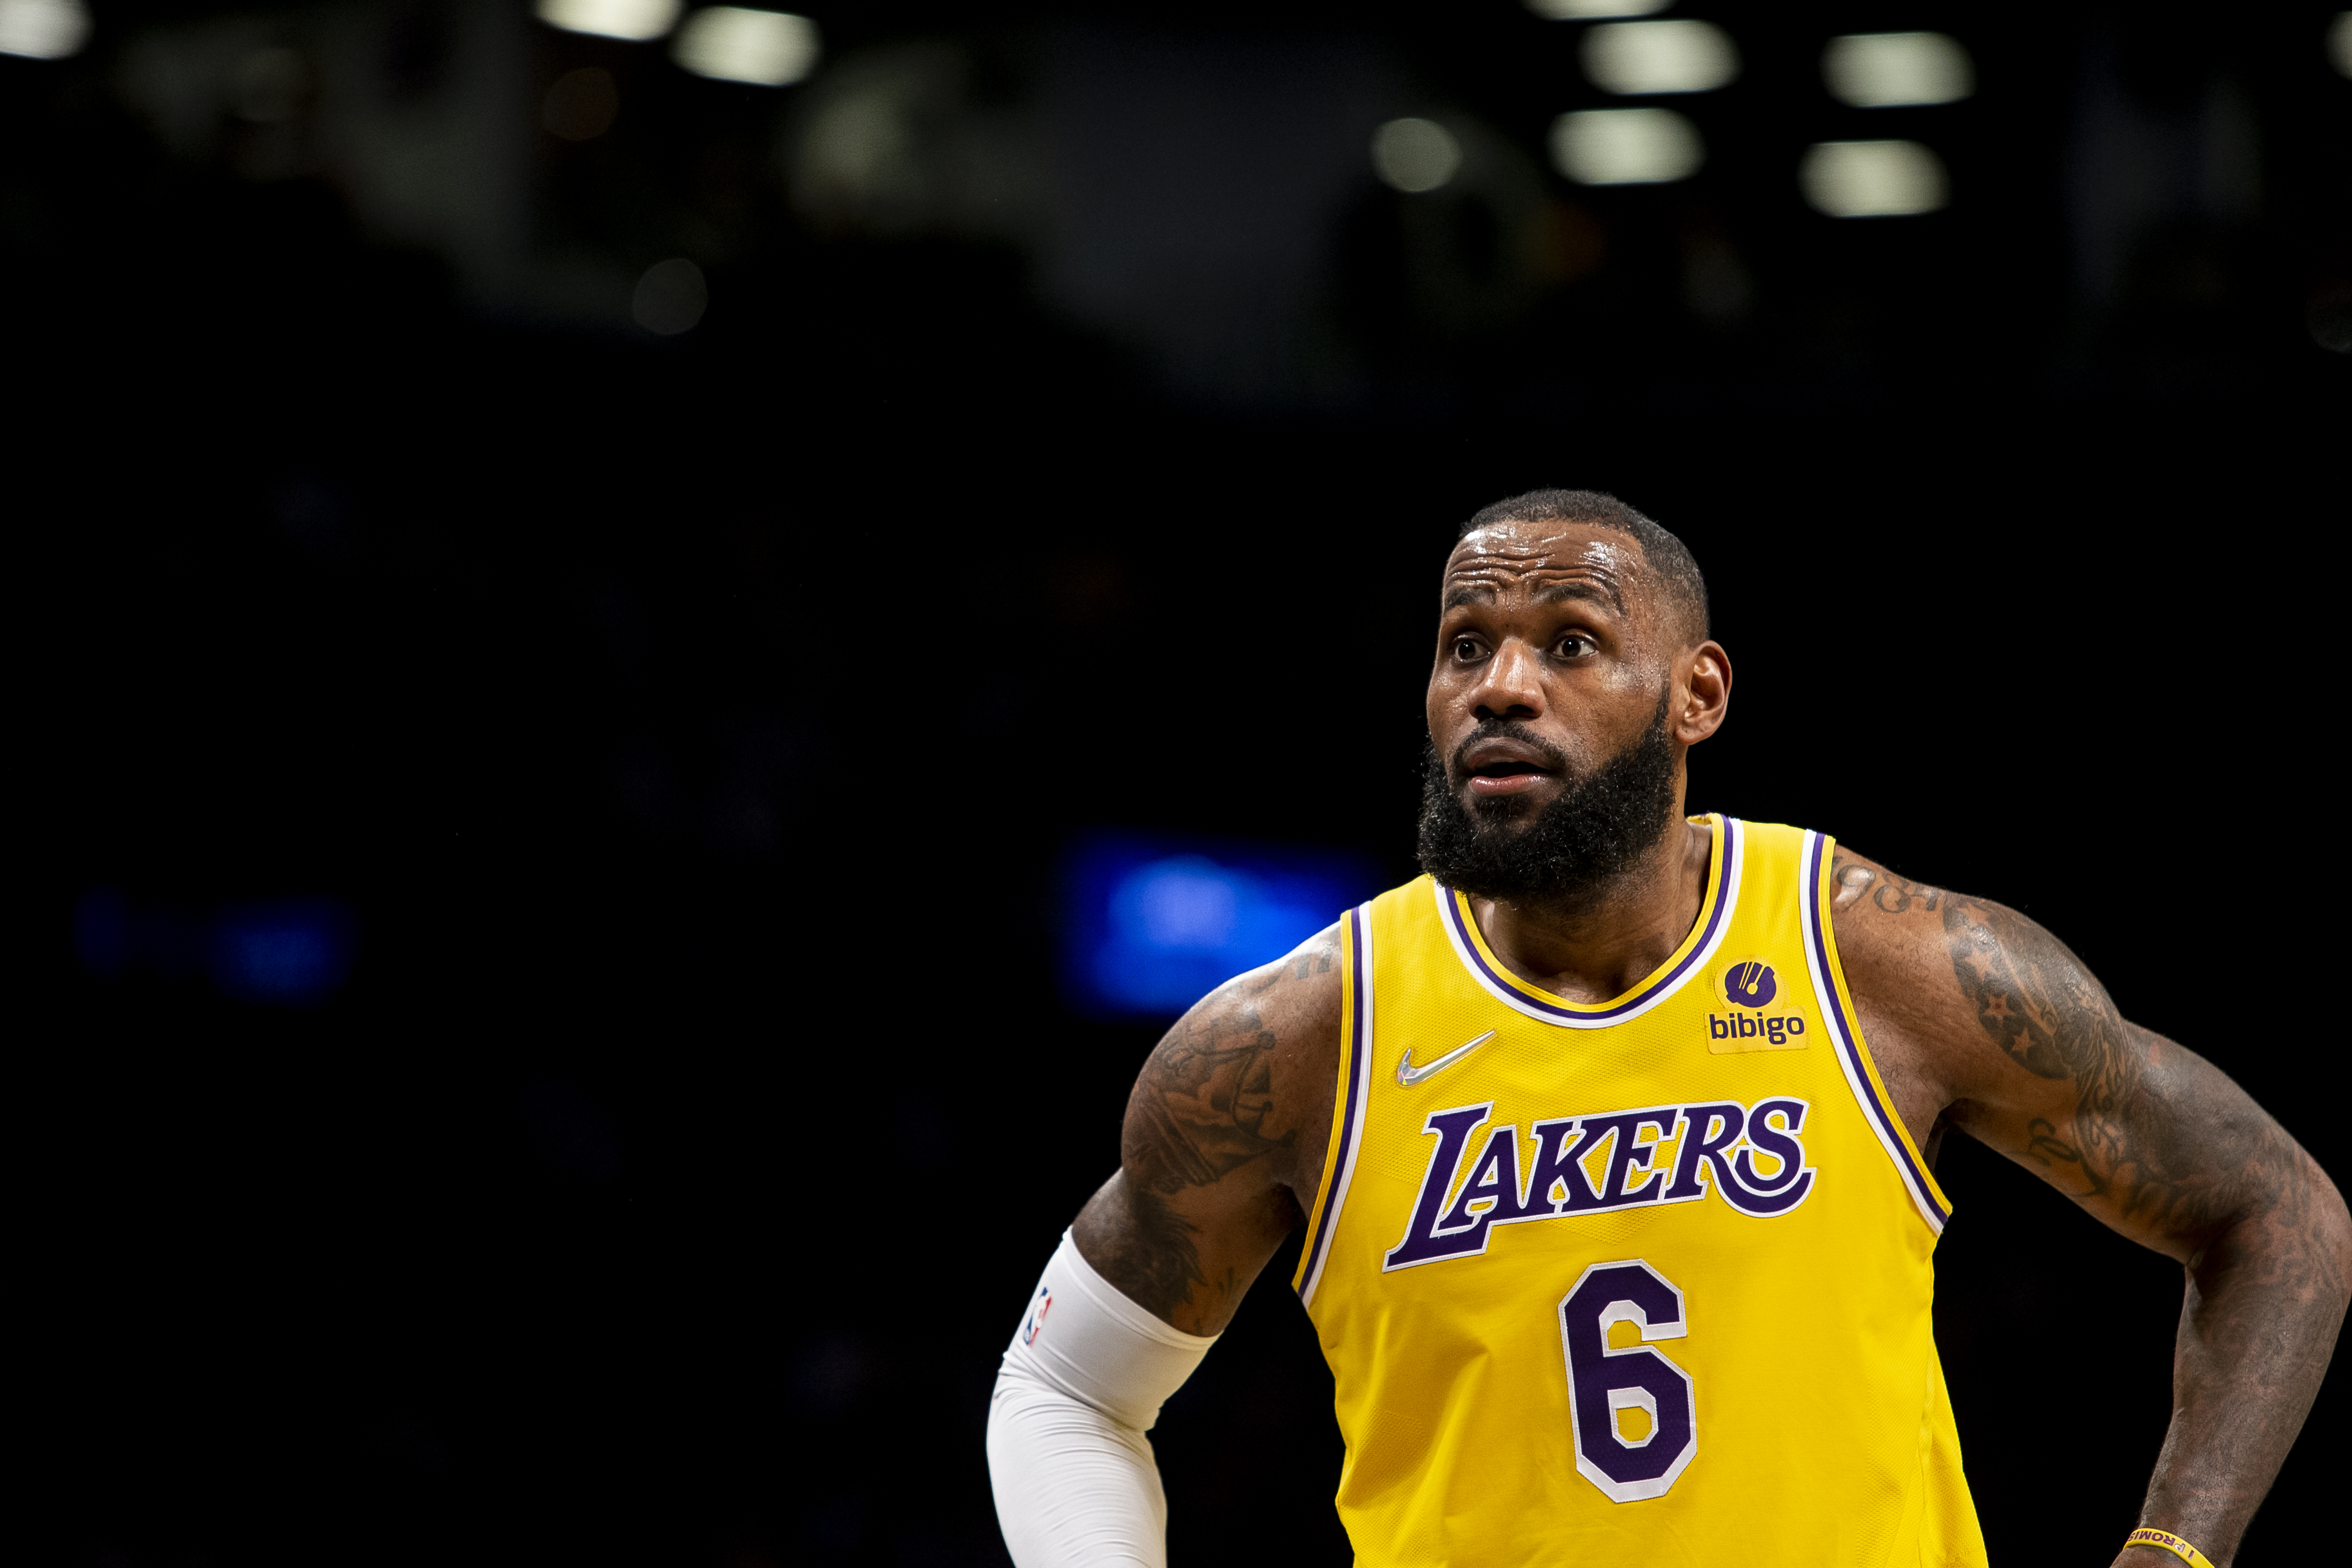 LeBron James #6 of Los Angeles Lakers reacts during action against the Brooklyn Nets at Barclays Center on January 25, 2022 in the Brooklyn borough of New York City.